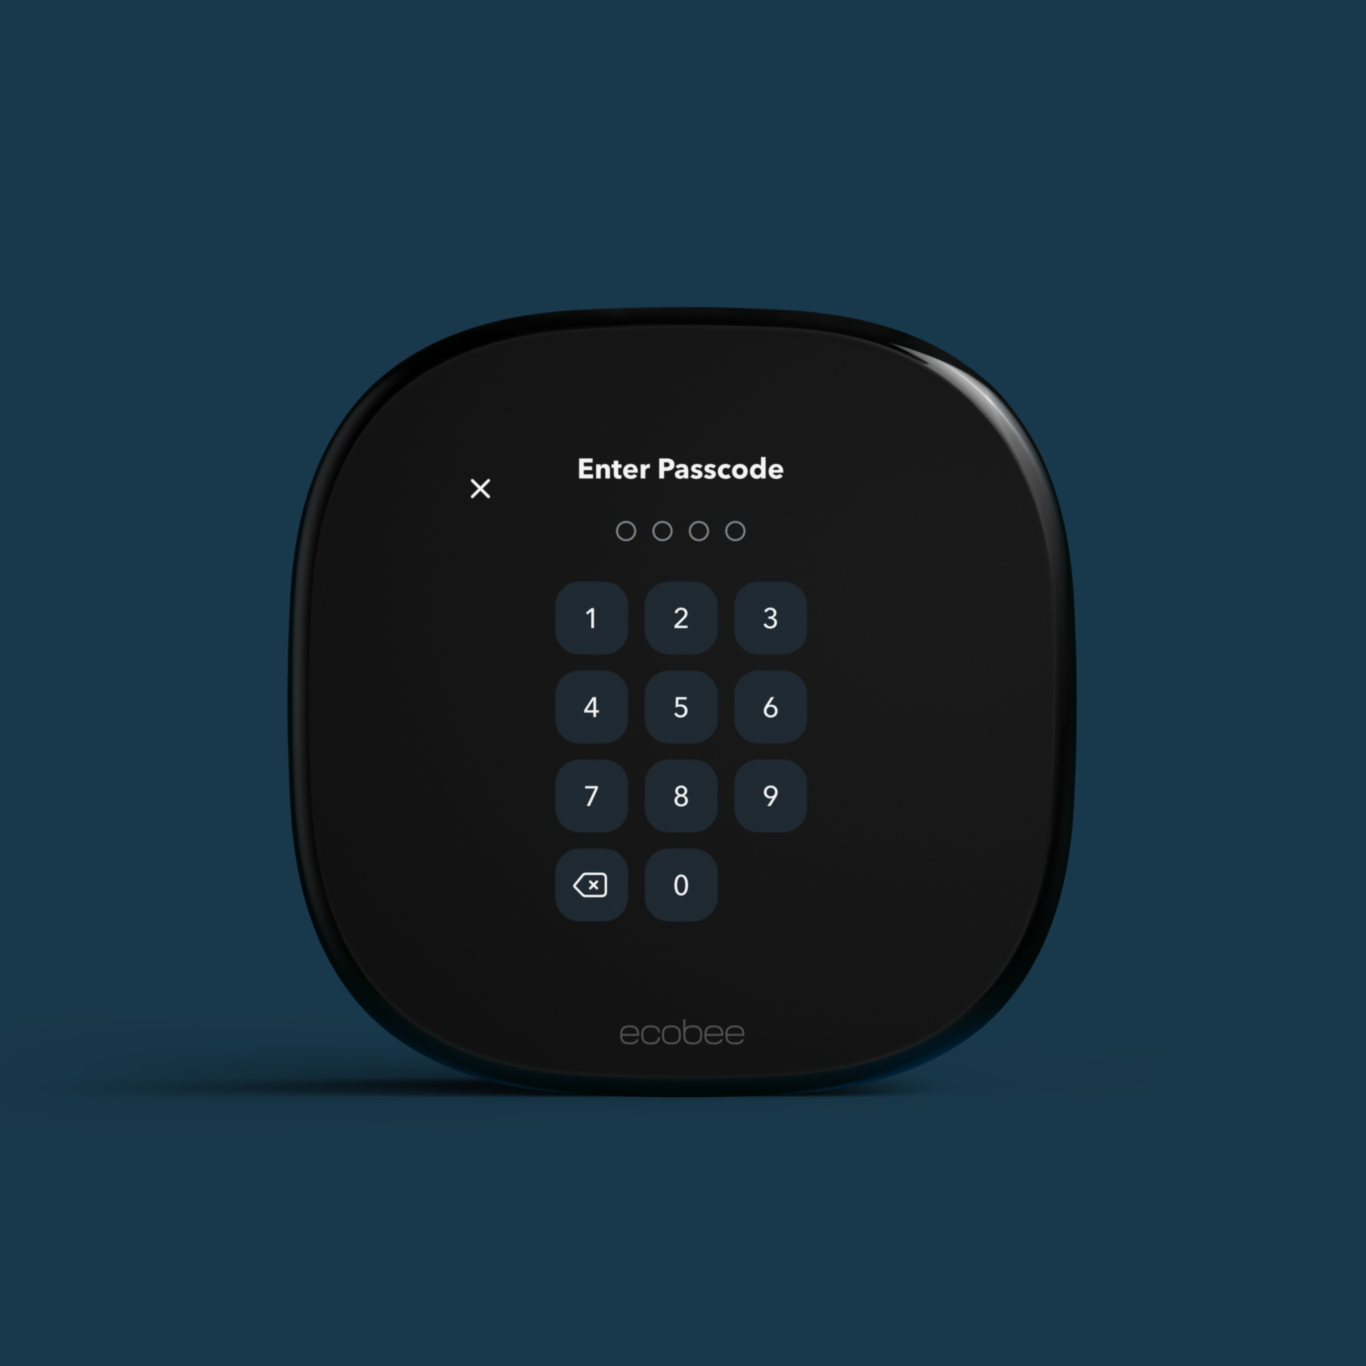 ecobee smart thermostat premium on a blue background while displaying a number pad on its screen.